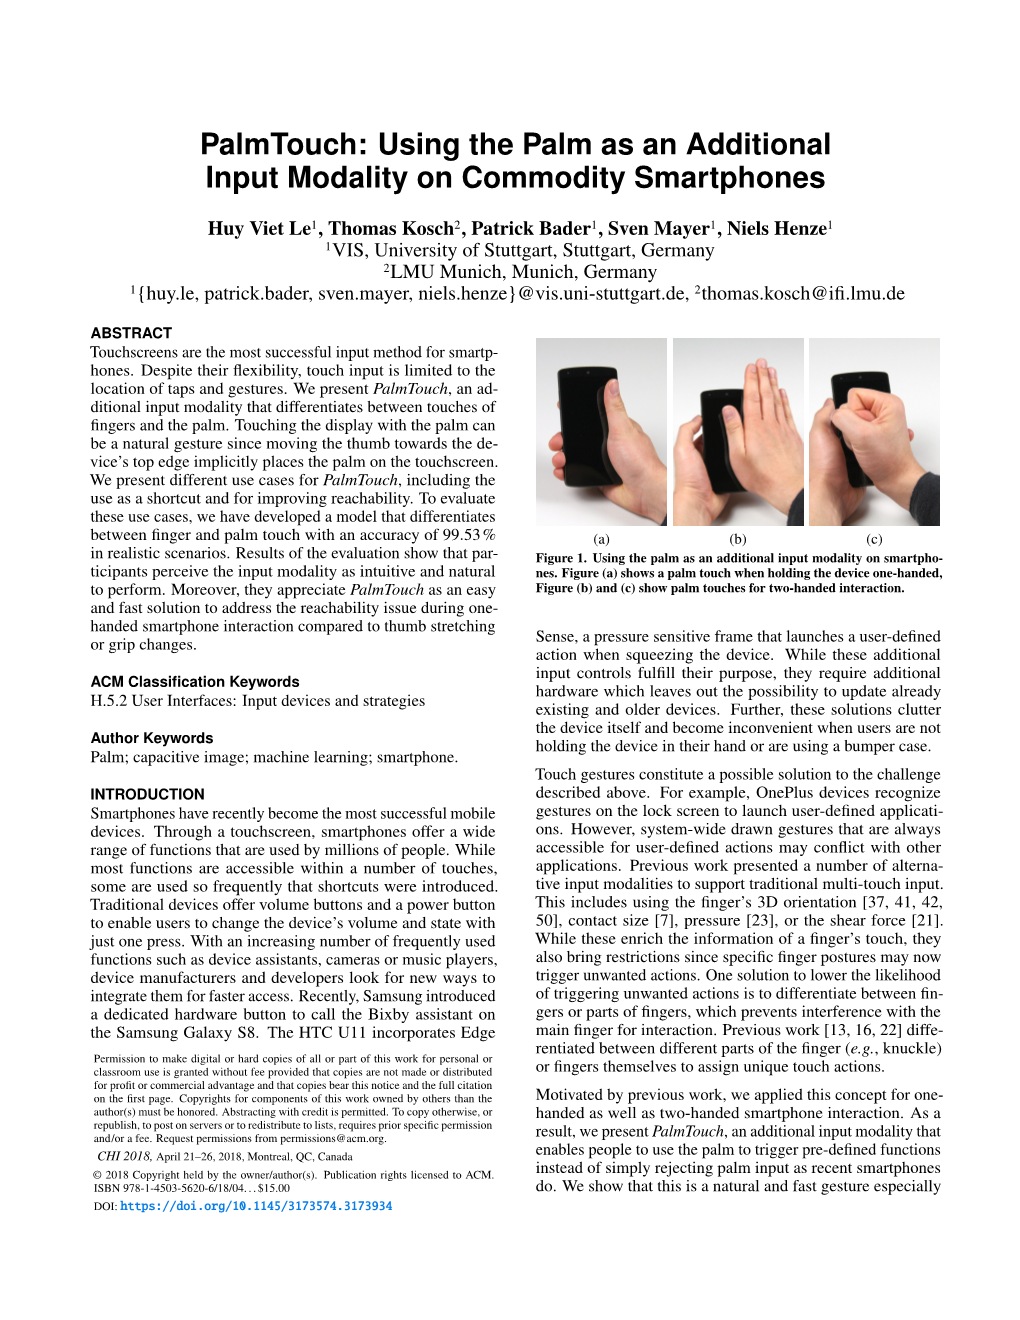 Palmtouch: Using the Palm As an Additional Input Modality on Commodity Smartphones